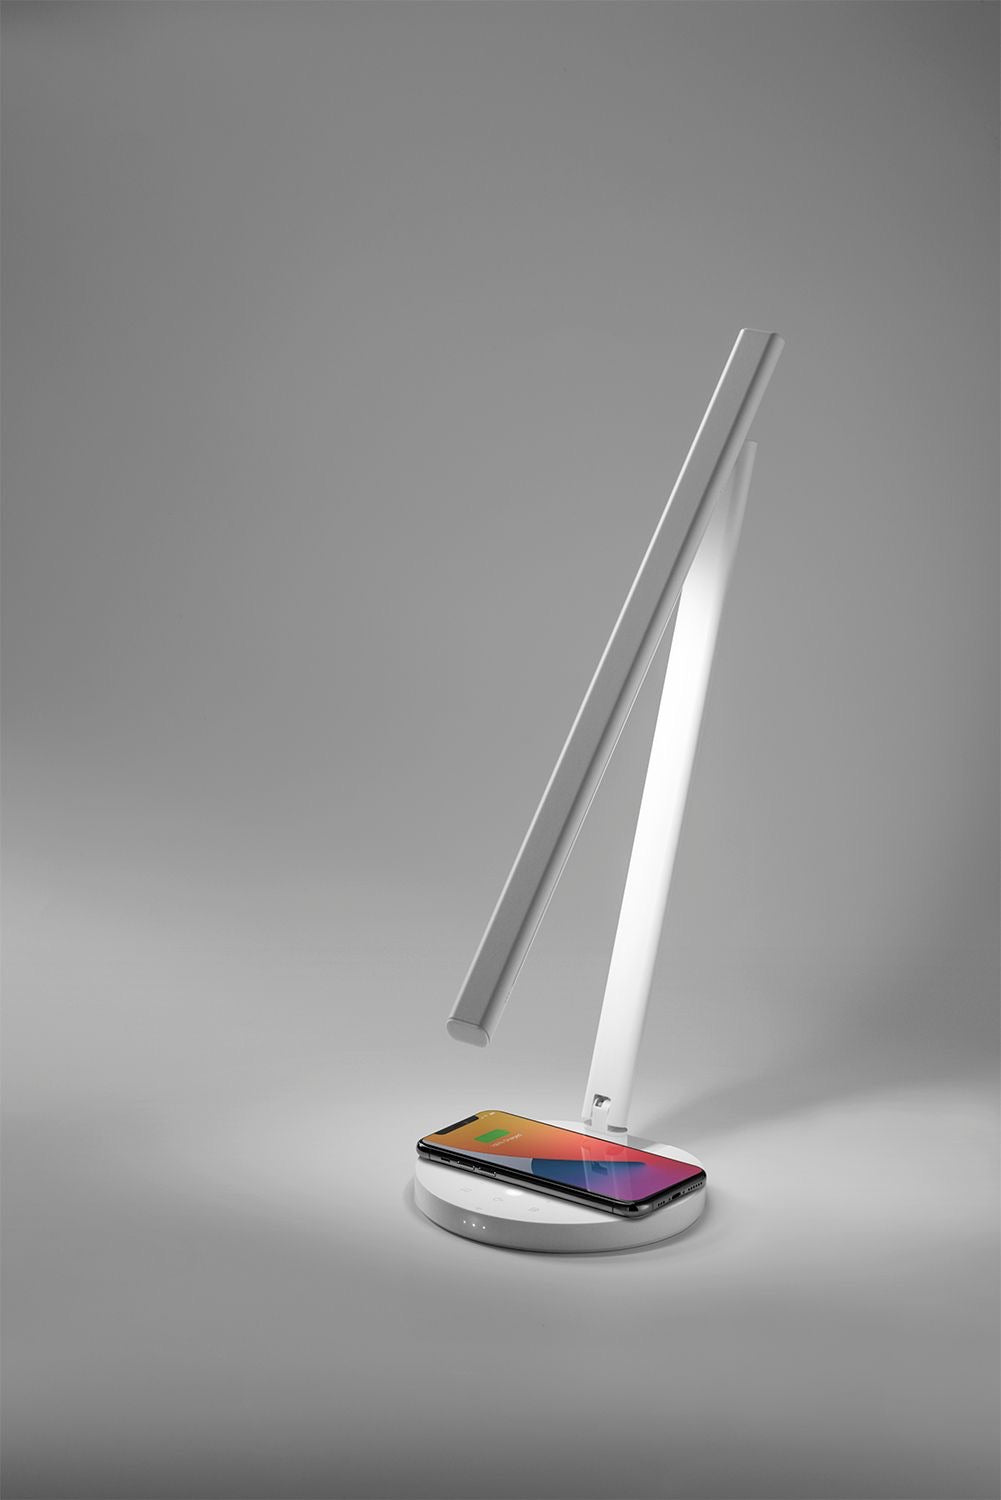 Momax IoT Lamp with Wireless Charging - TECH STREET